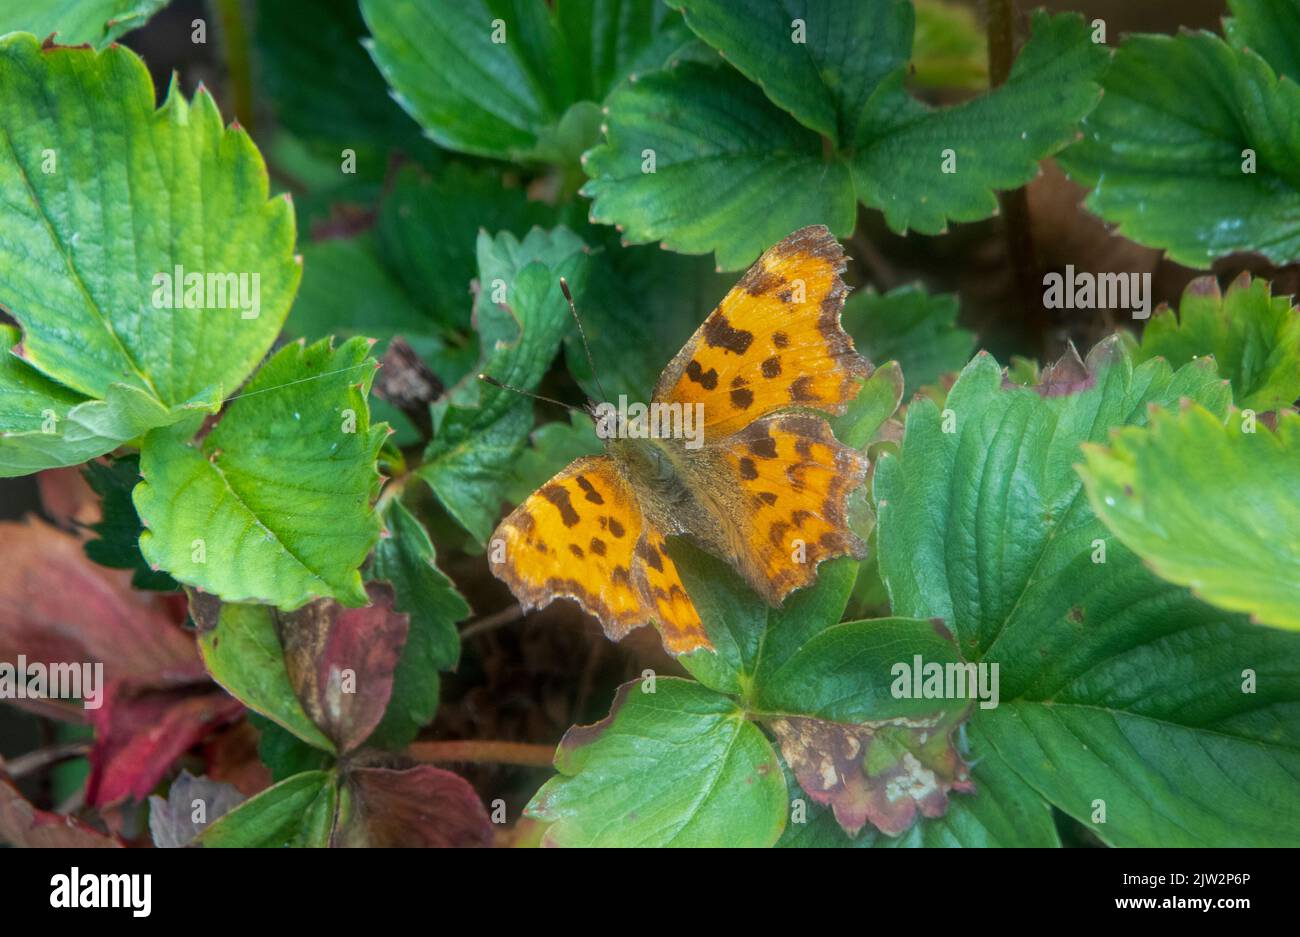 Comma butterfly on leaf Banque D'Images